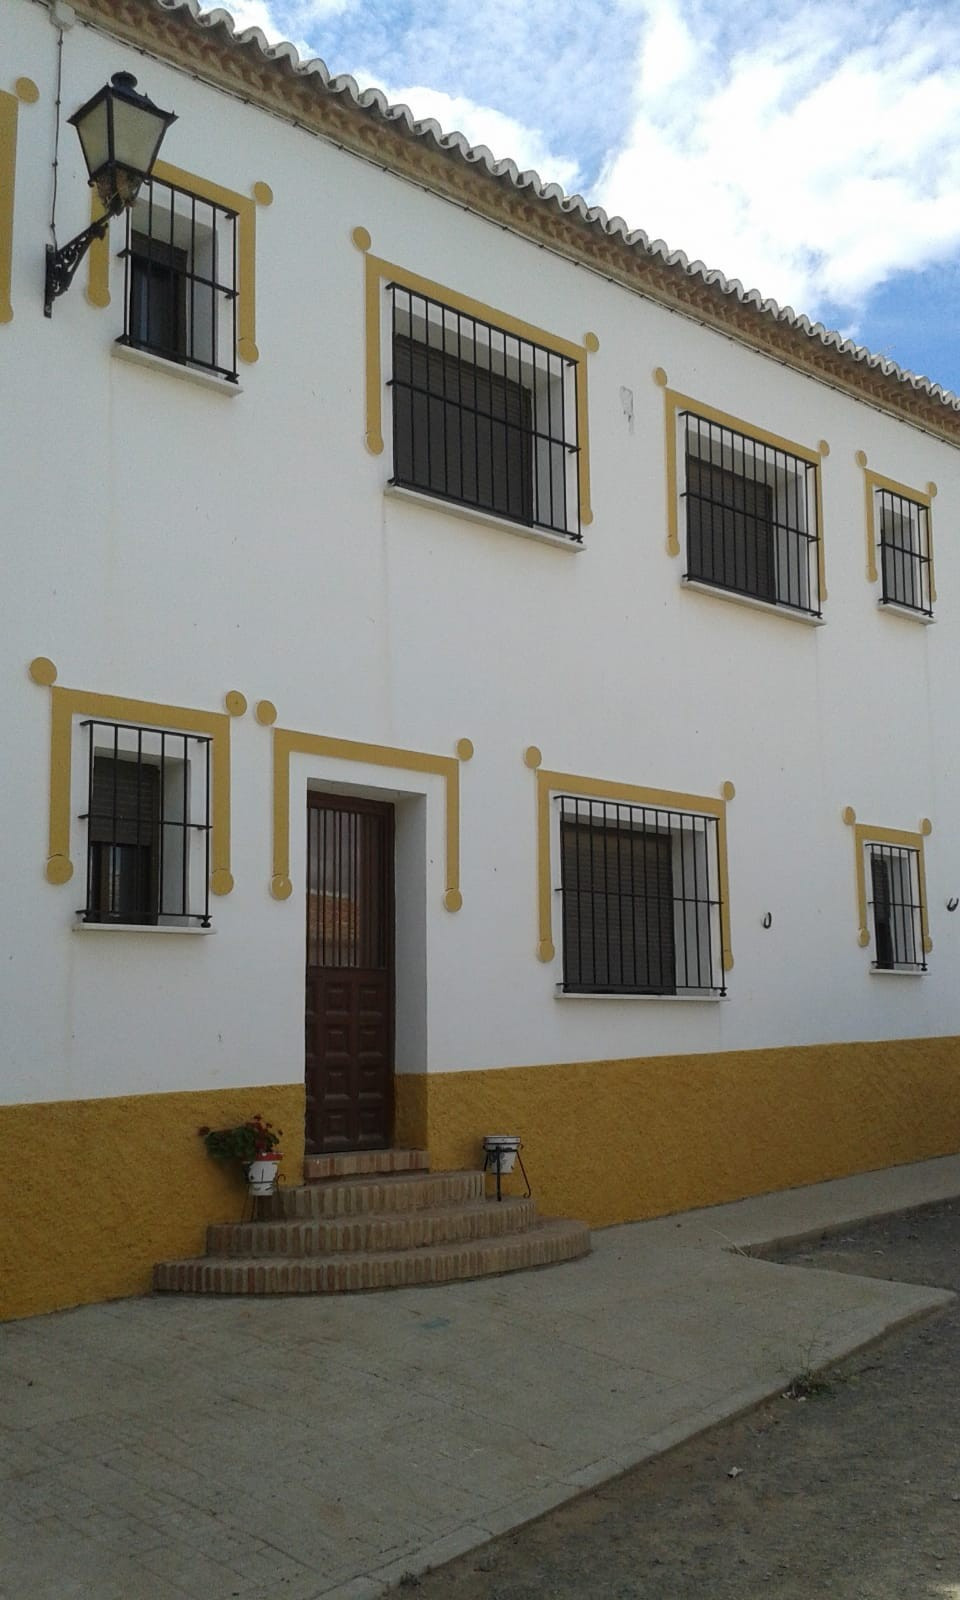 Huge finca of 298 hectares (298.000 square meters) located 21 kms West of Antequera, between Bobadilla and Campillos, destined for agricultural use.